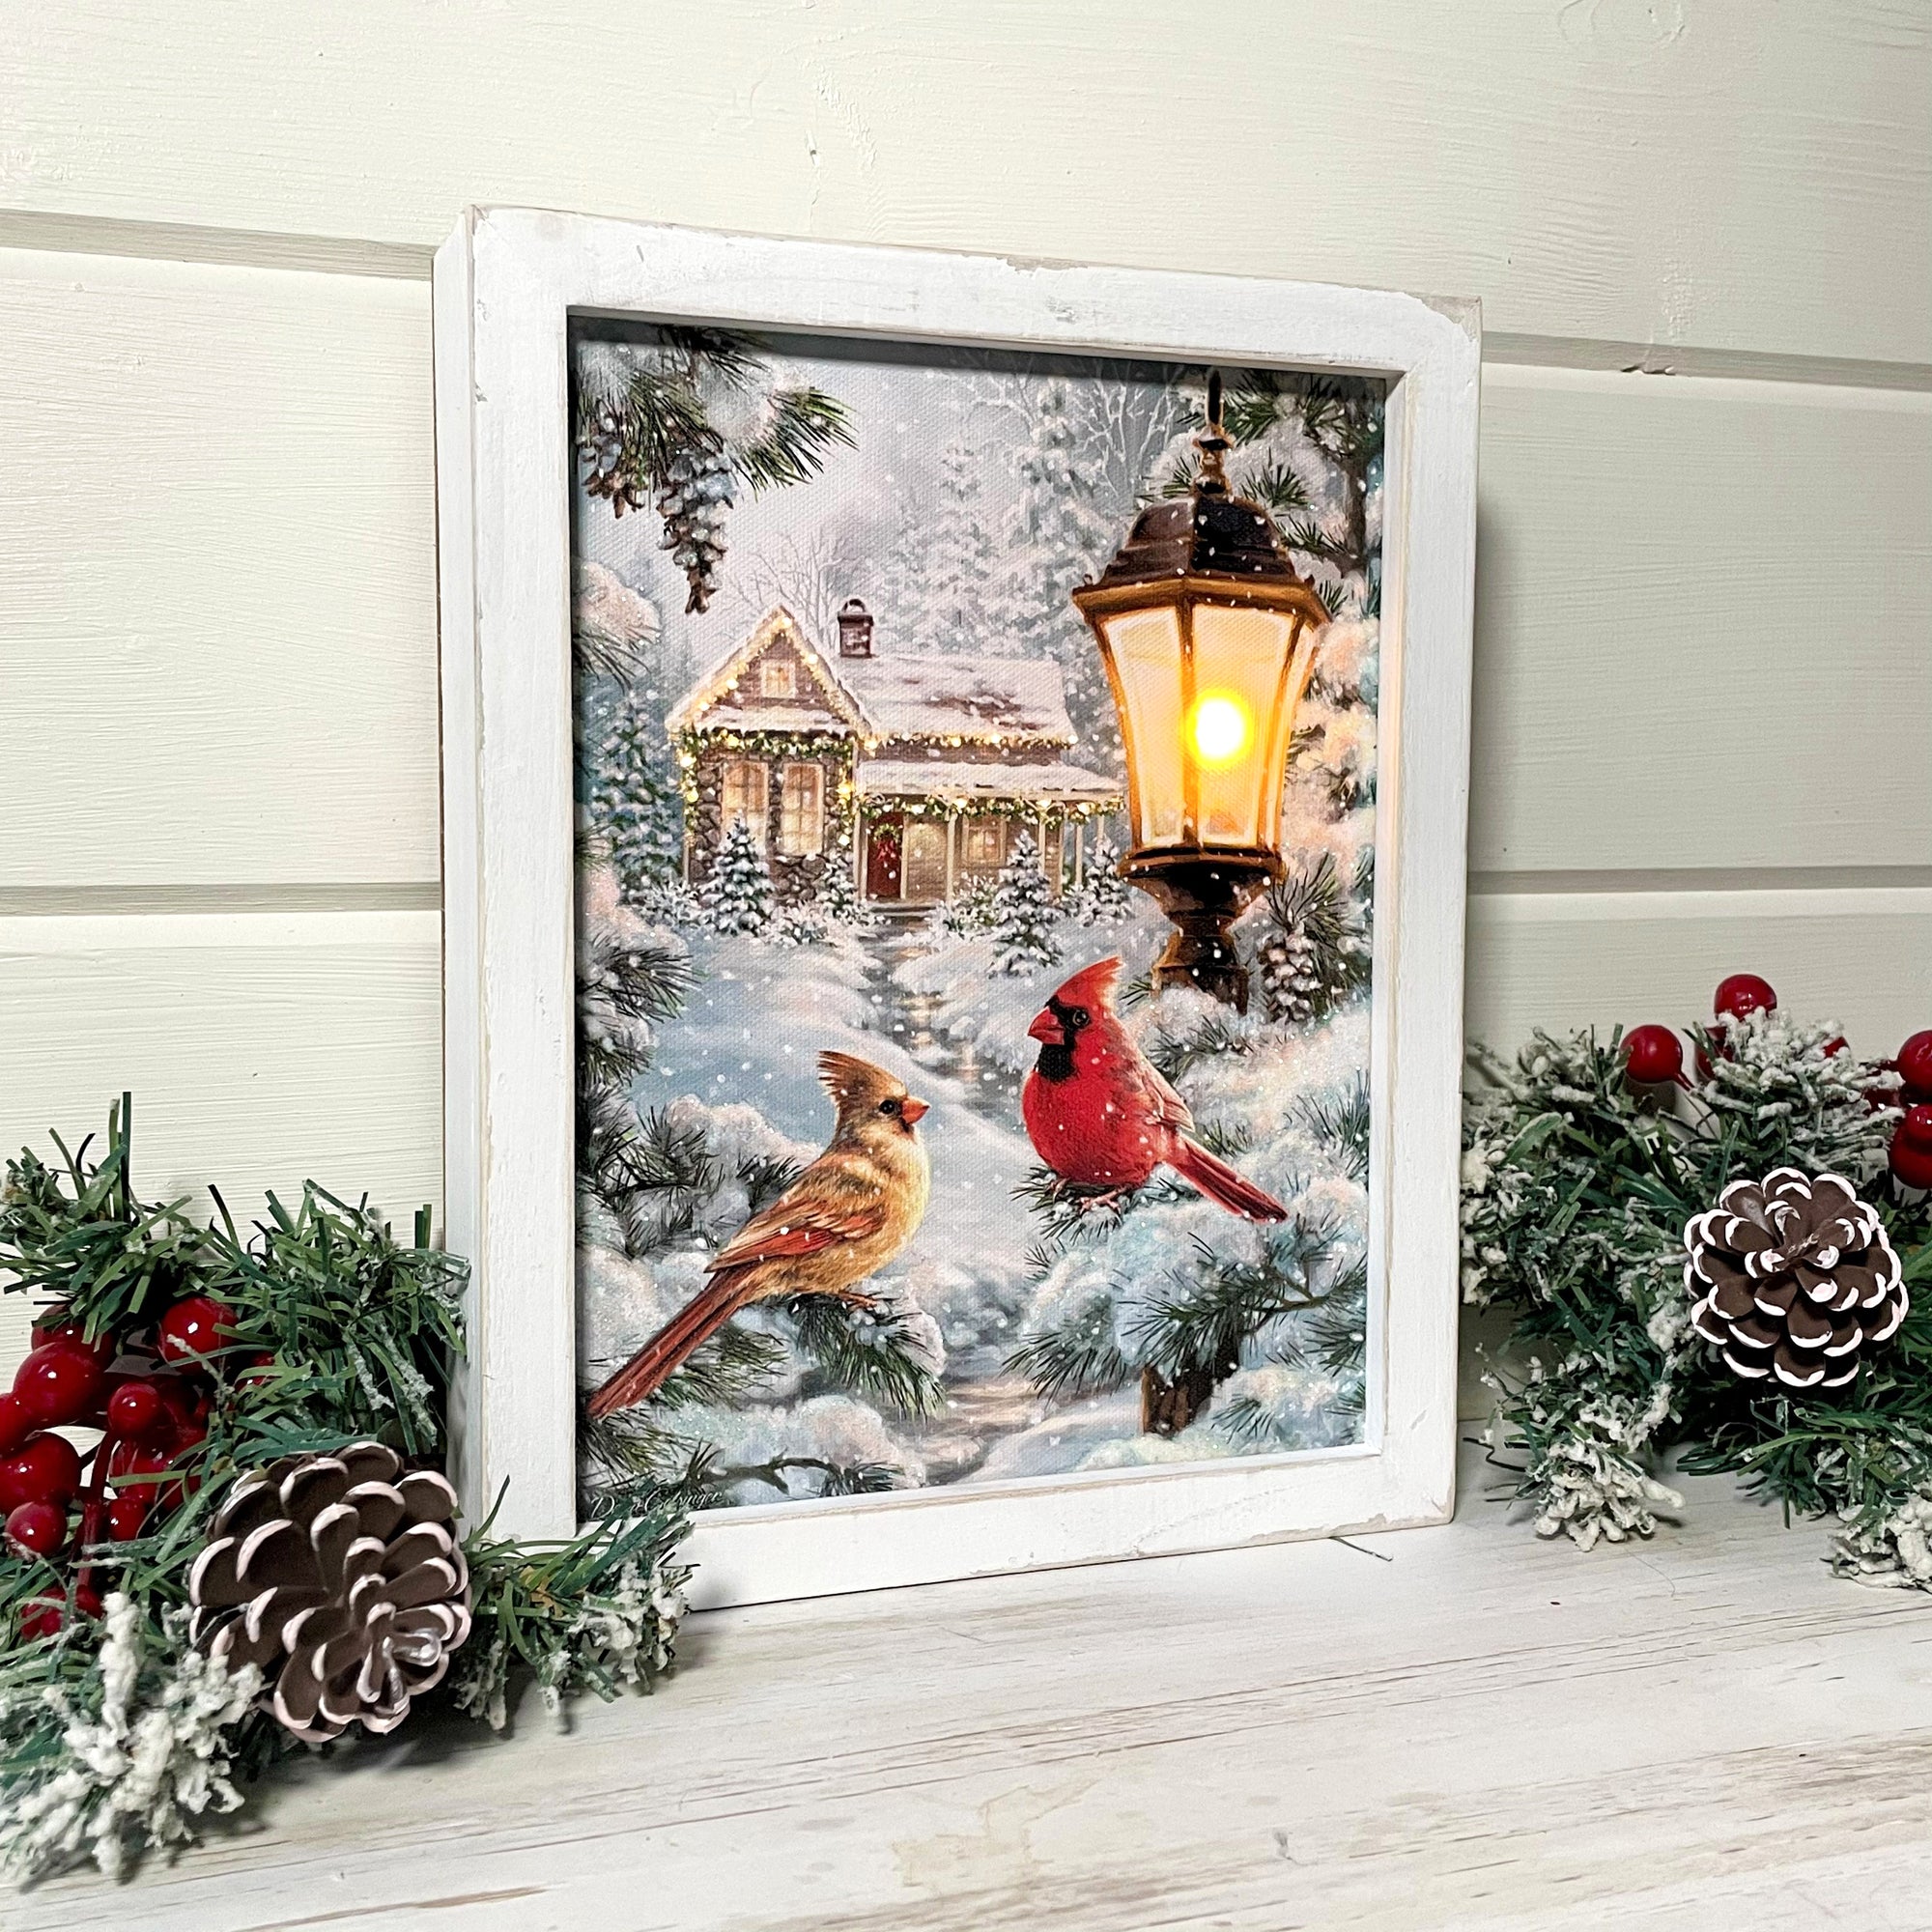 Look no further than our All is Calm Lighted Shadow Box, featuring two beautiful cardinals perched beside a snow-covered lantern, with a cozy cottage in the background.  As the soft glow of the LED lights illuminates this stunning scene, you'll feel transported to a peaceful winter wonderland, where love and serenity reign supreme.